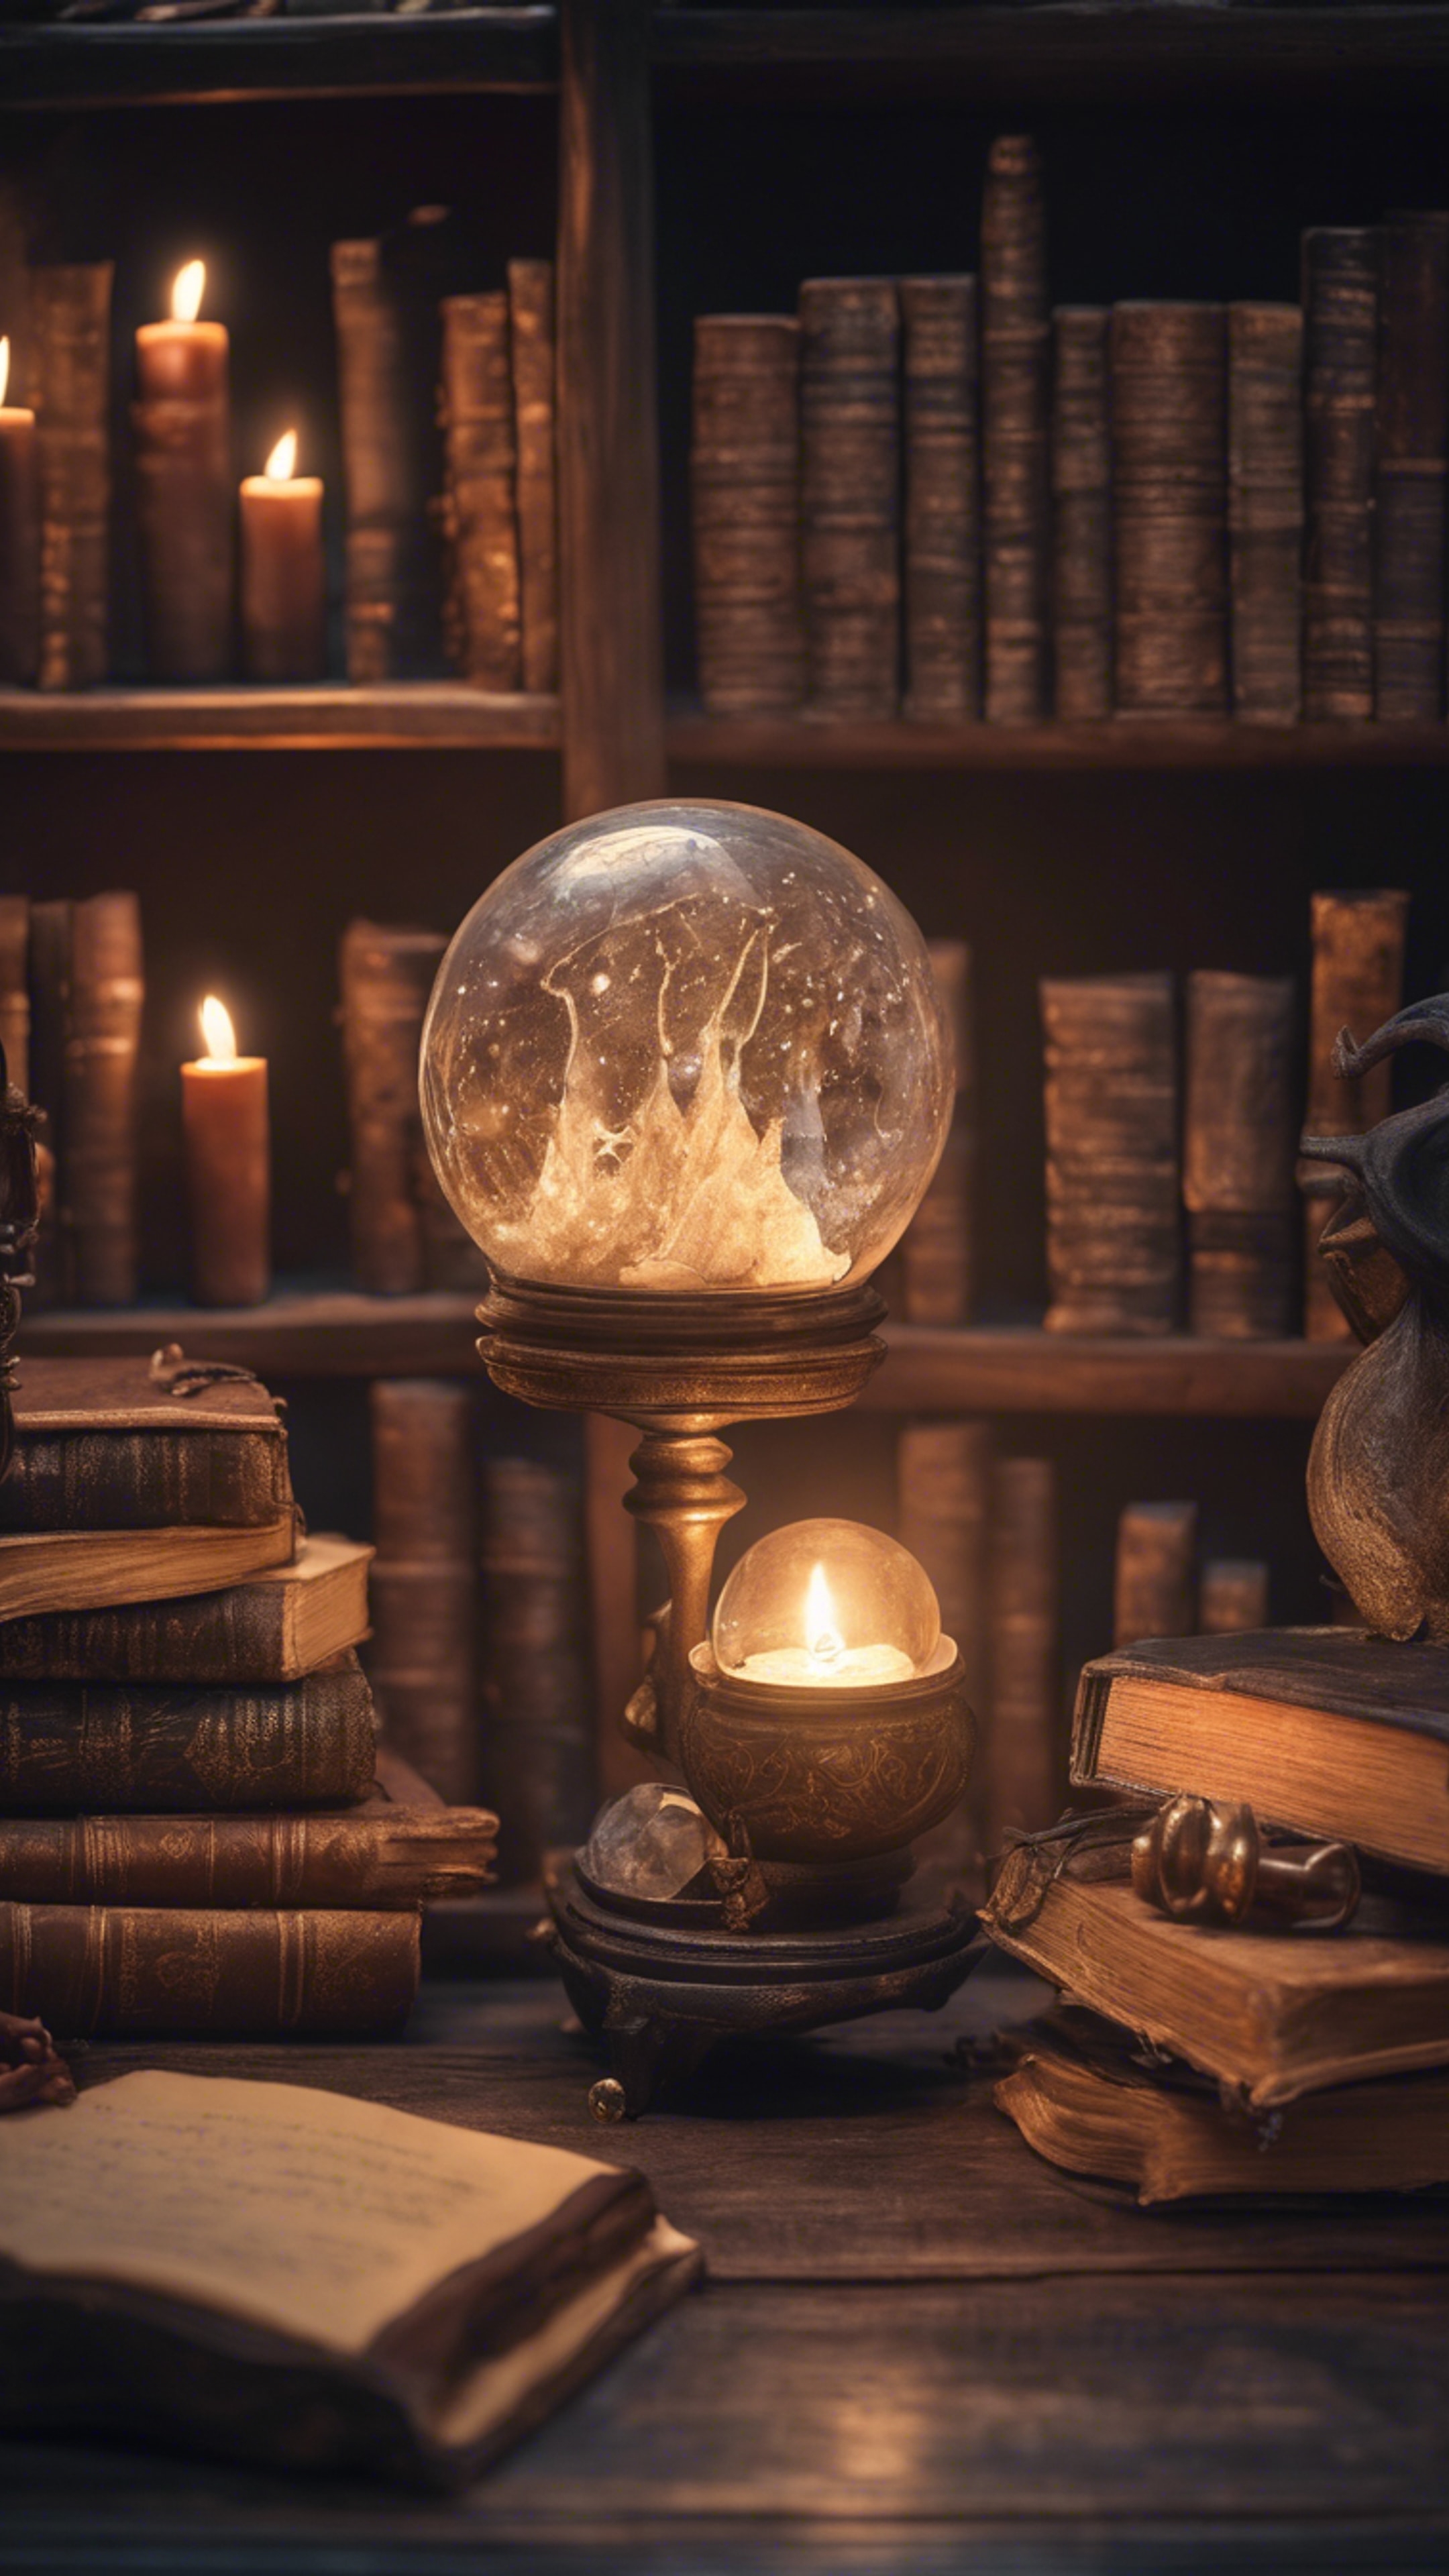 A cozy mystical scene with a wizard’s study room - magical artifacts, rows of spell books, a crystal ball, and a cauldron brewing a potion. Валлпапер[df00e949c5584759a81e]